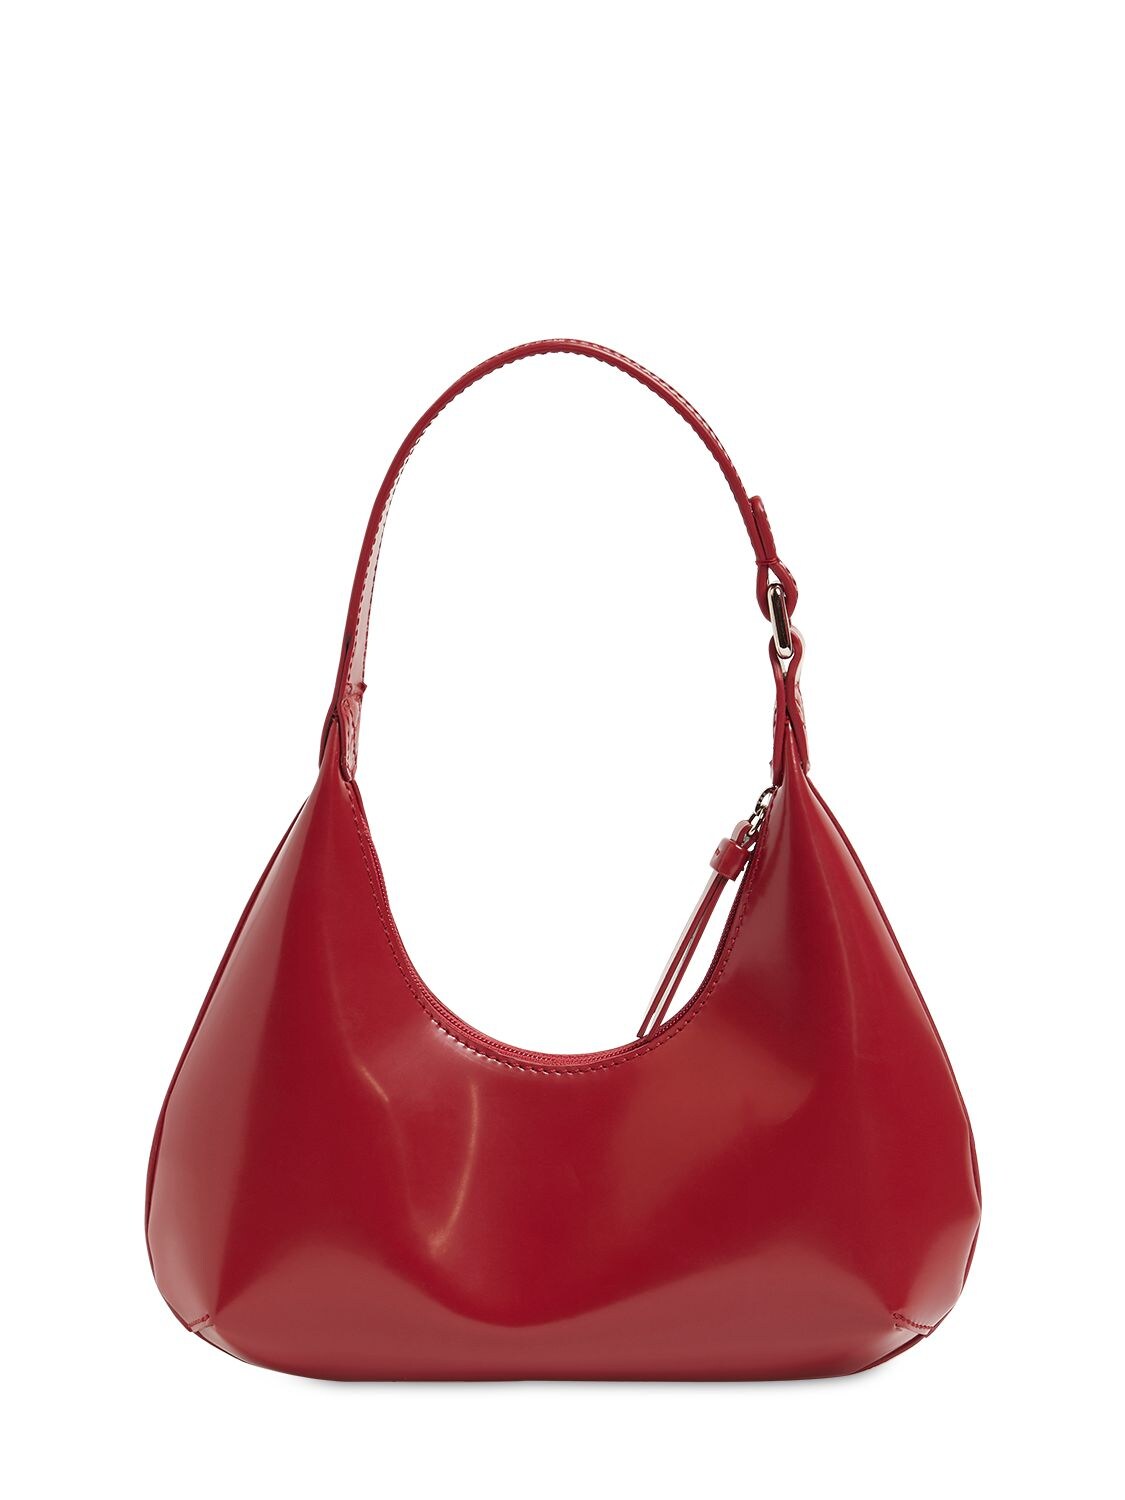 BY FAR BABY AMBER SEMI PATENT LEATHER BAG,72IAIB045-QLG1